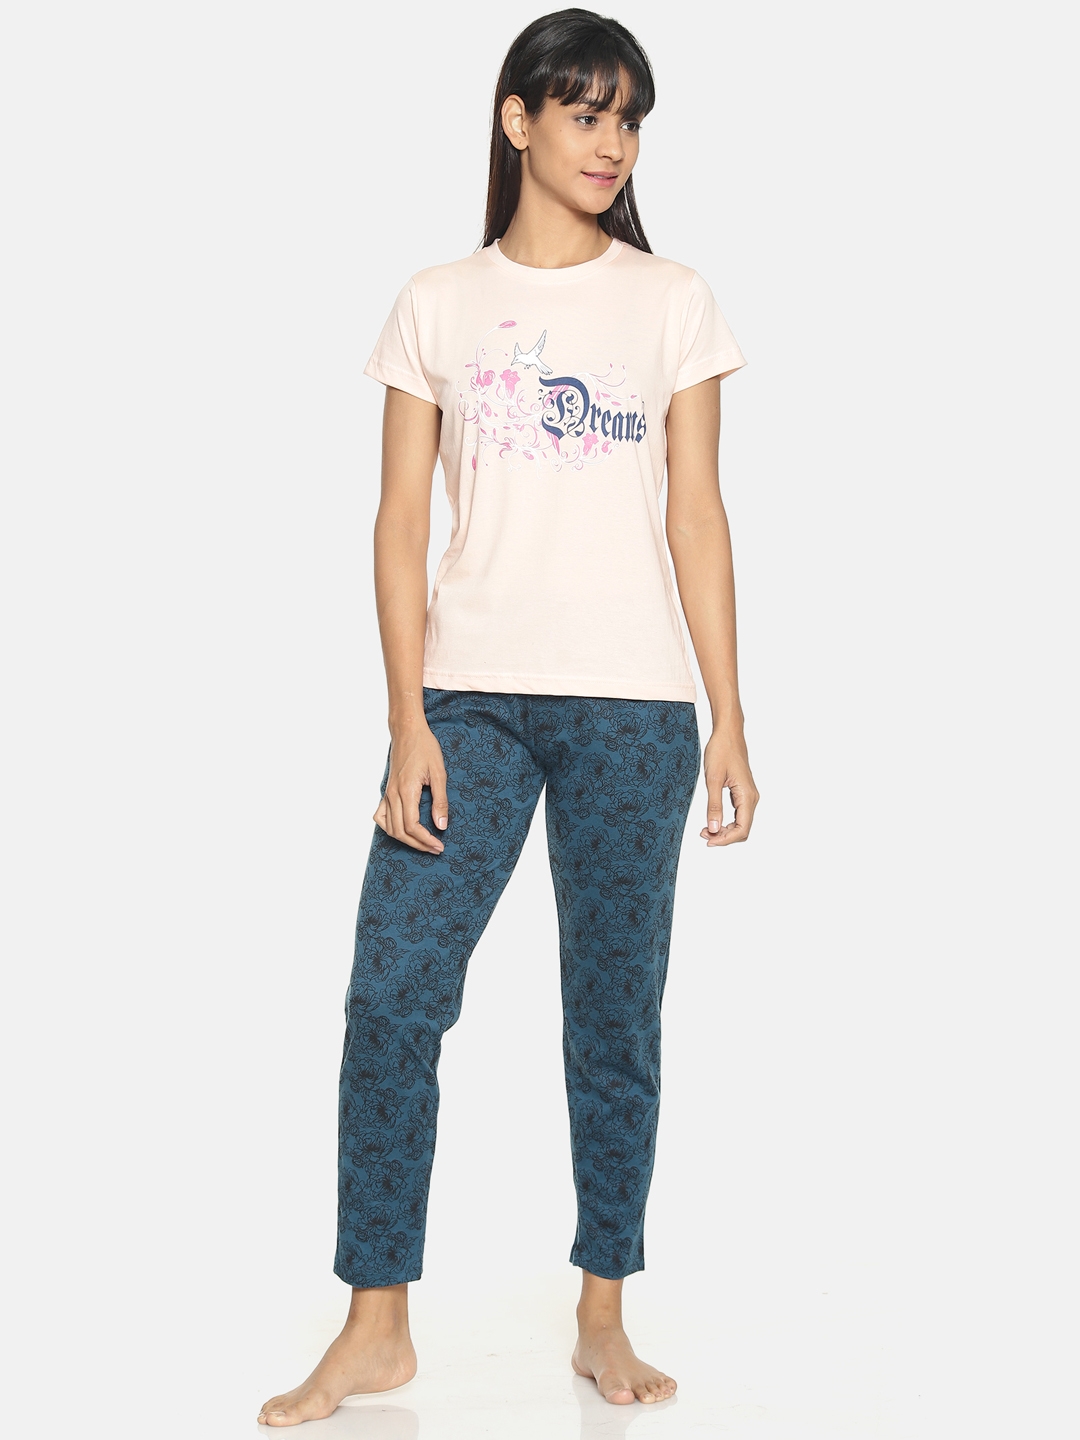 Kryptic | Kryptic Womens 100% cotton printed nightsuit with all over printed bottom and graphic printed Tshirt